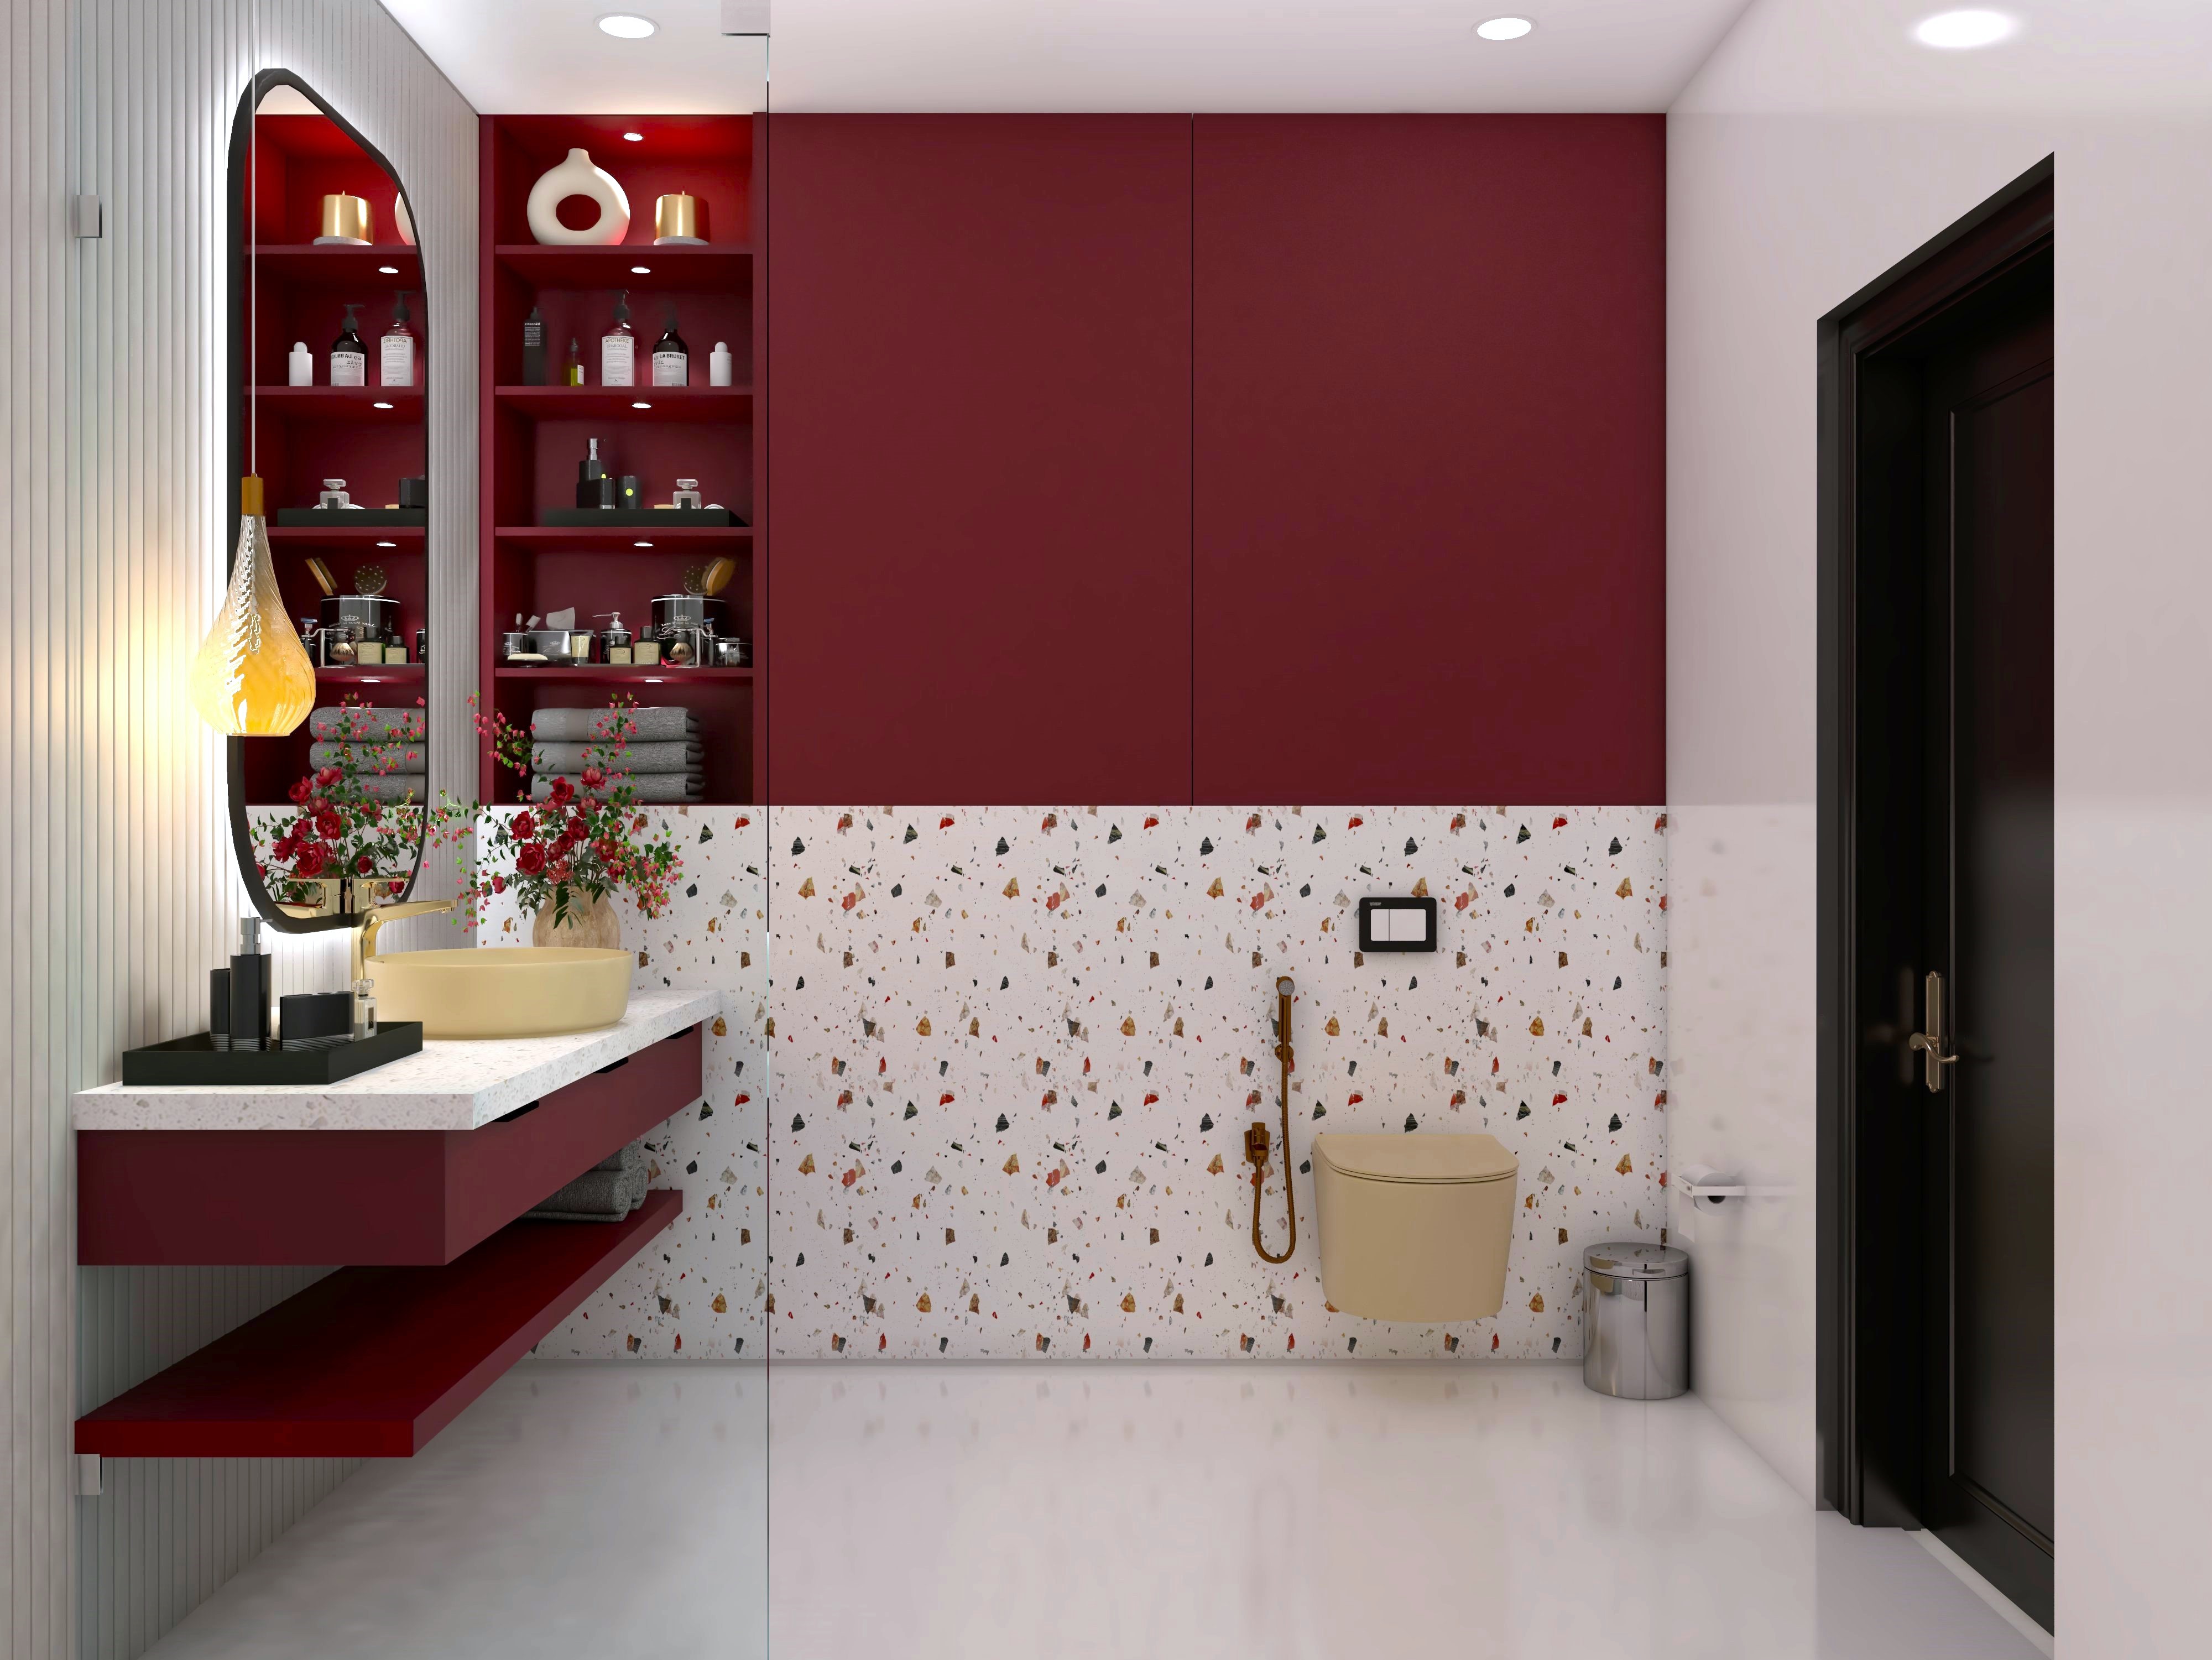 Bathroom with red vanity and terrazzo wall tiles - Beautiful Homes